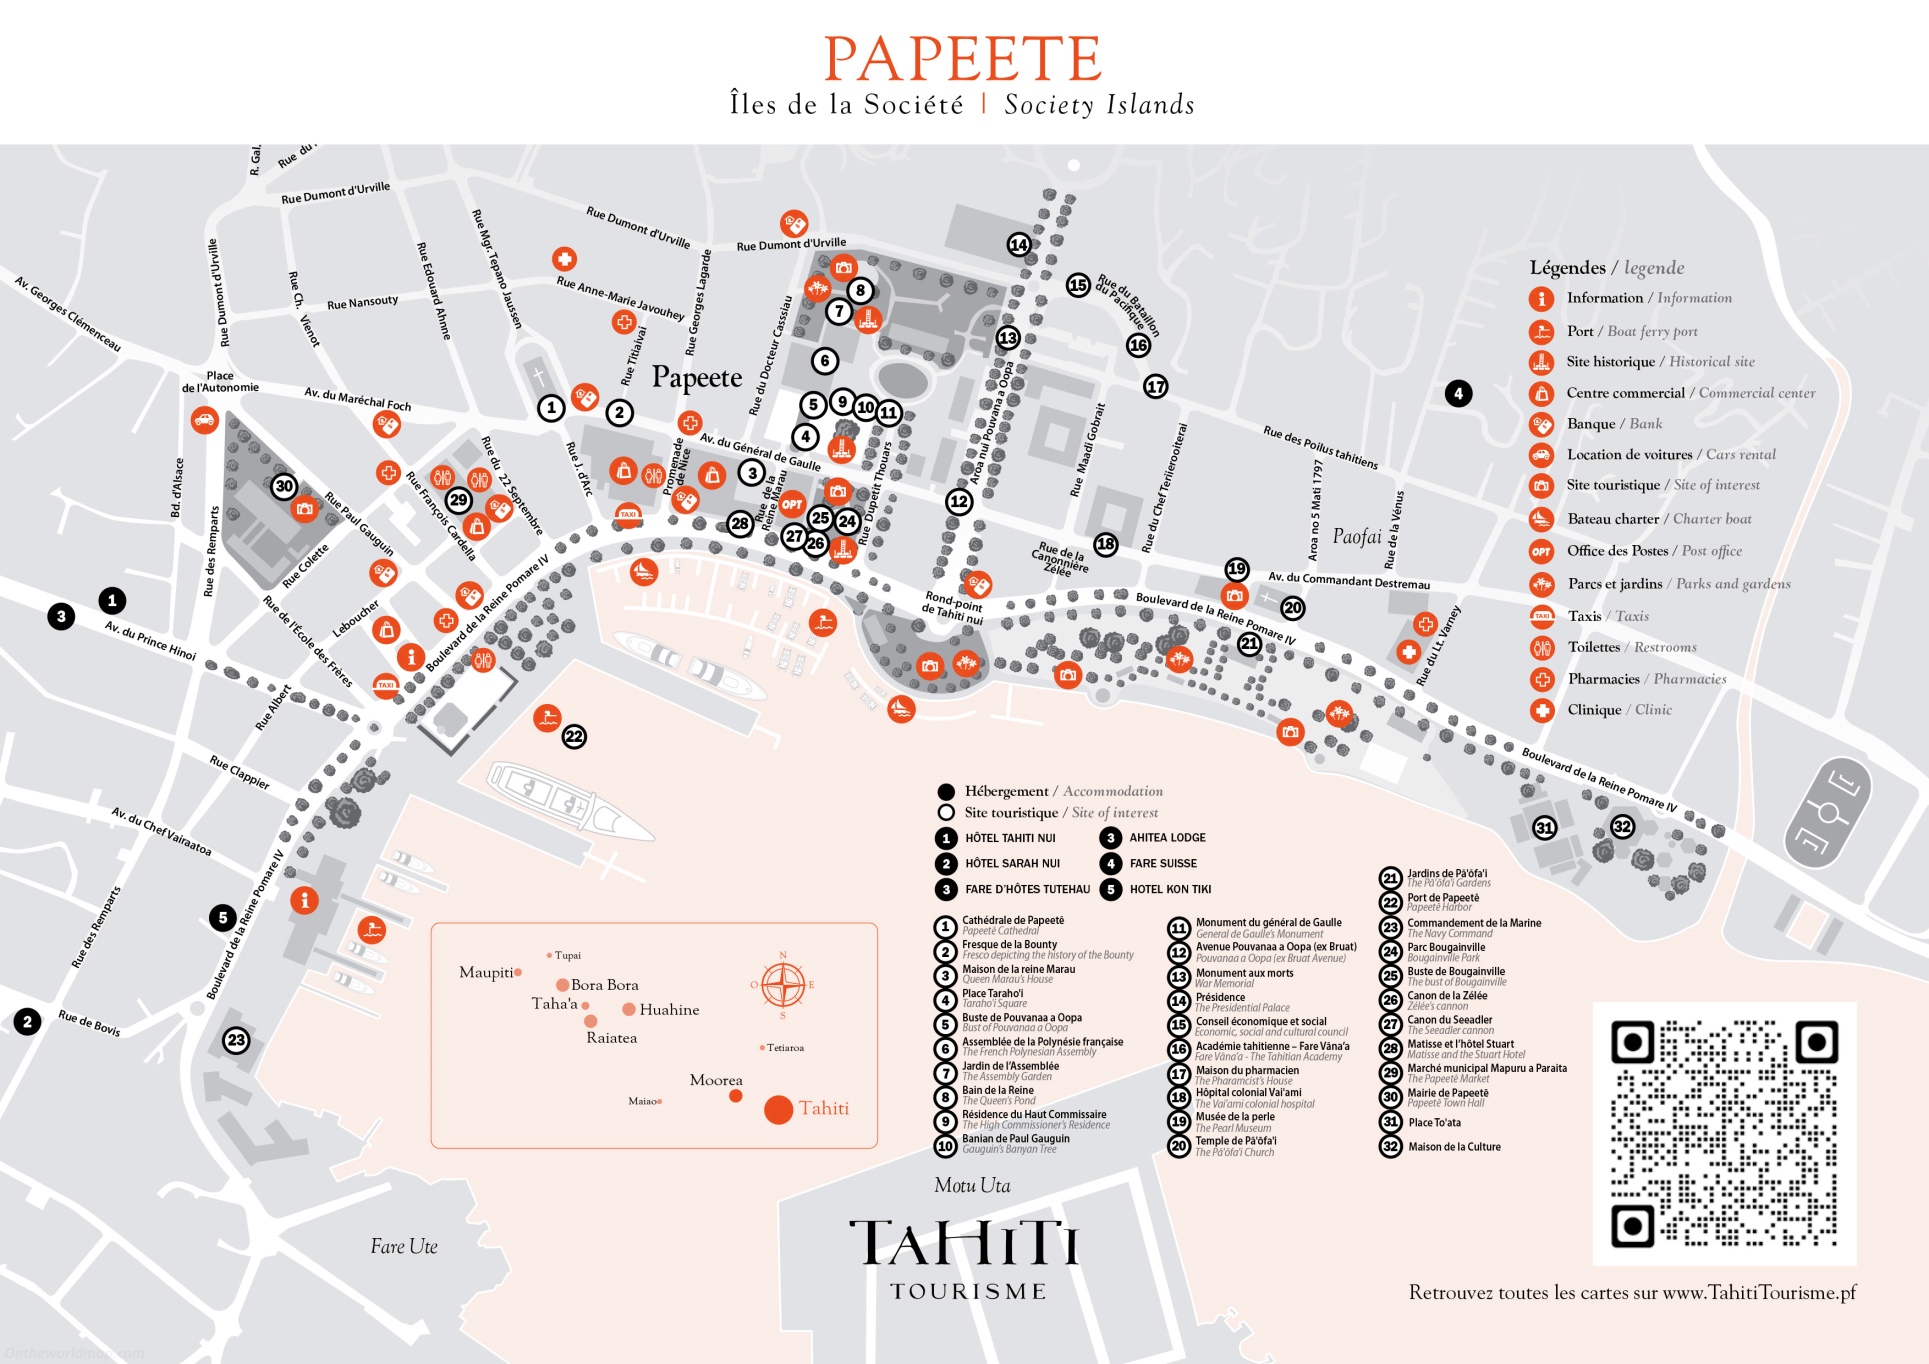 Papeete Hotels And Tourist Attractions Map